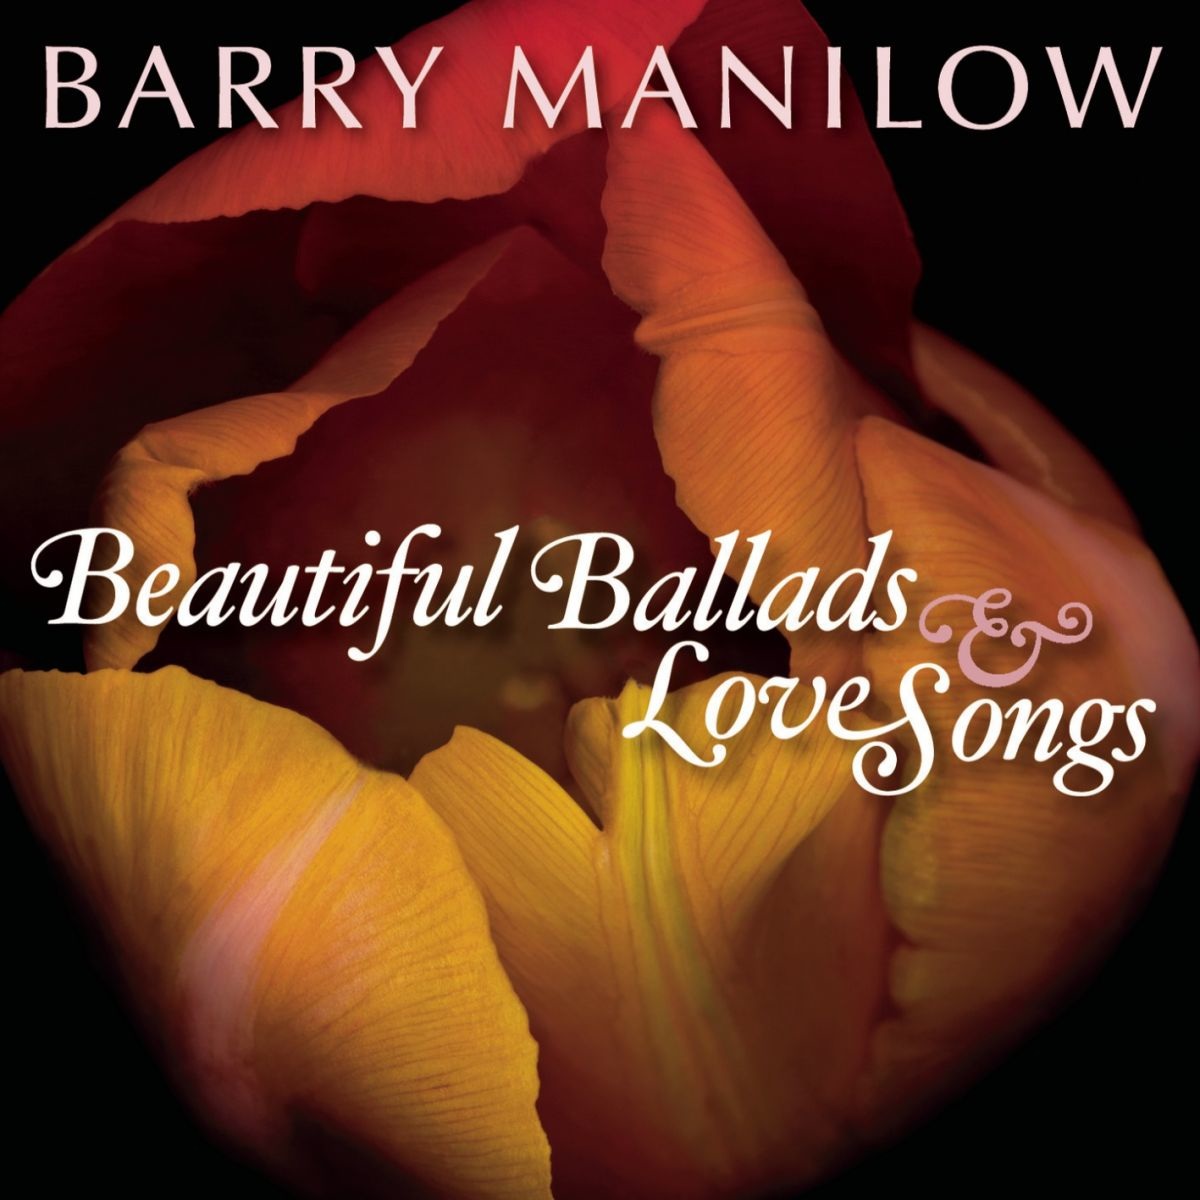 Cd Barry Manilow- Beautiful Ballads & Love Songs Cover